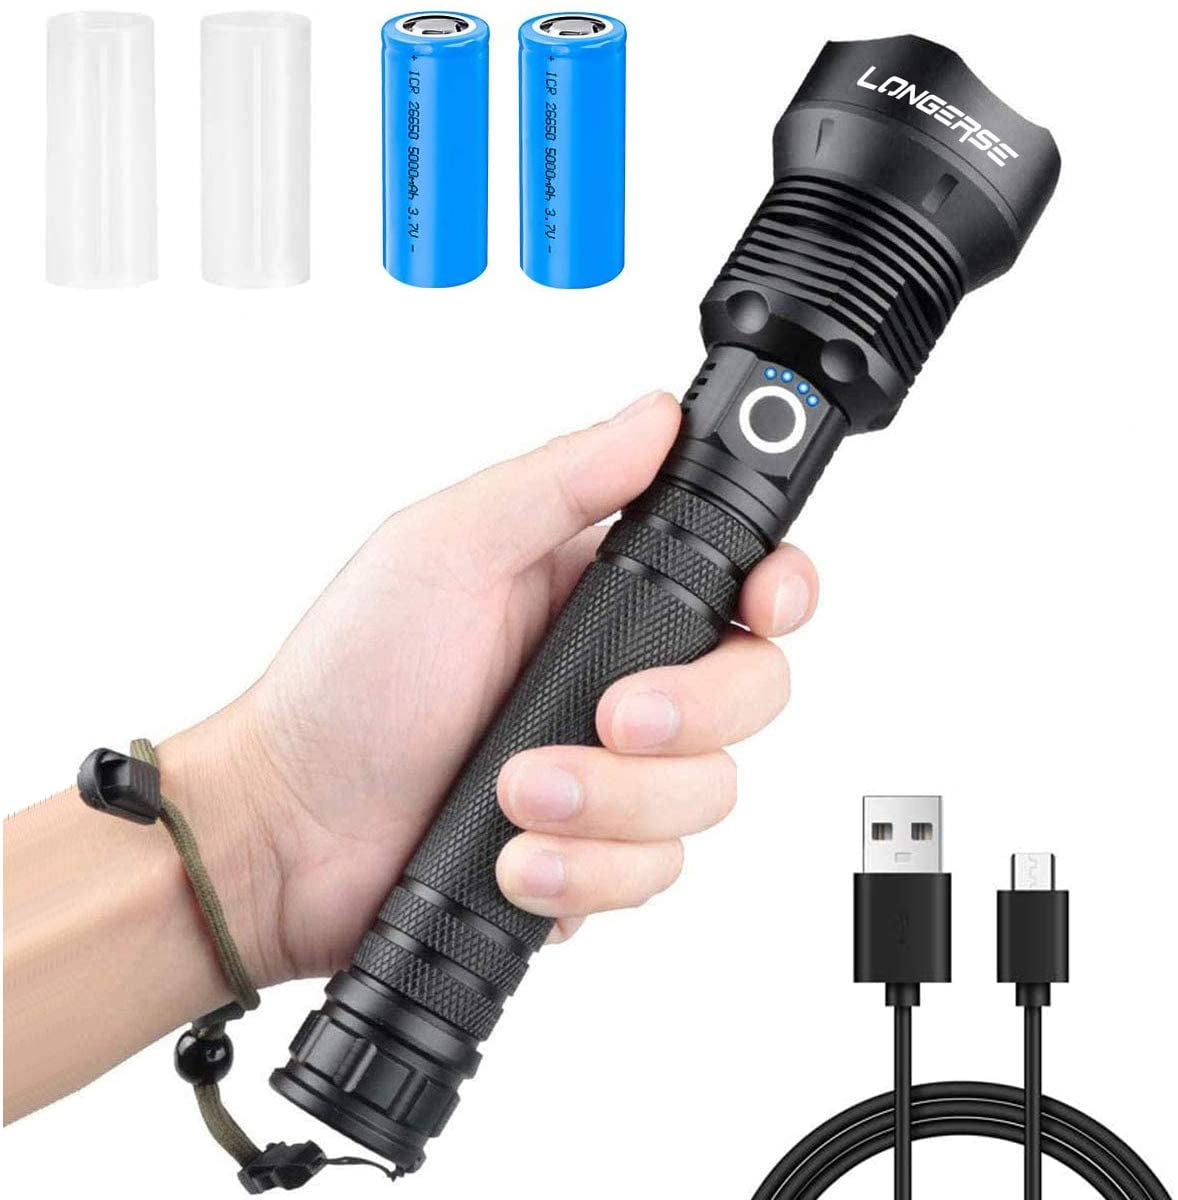 350000LM T6 LED Rechargeable High Power Torch Flashlight Light Lamps & Charger 